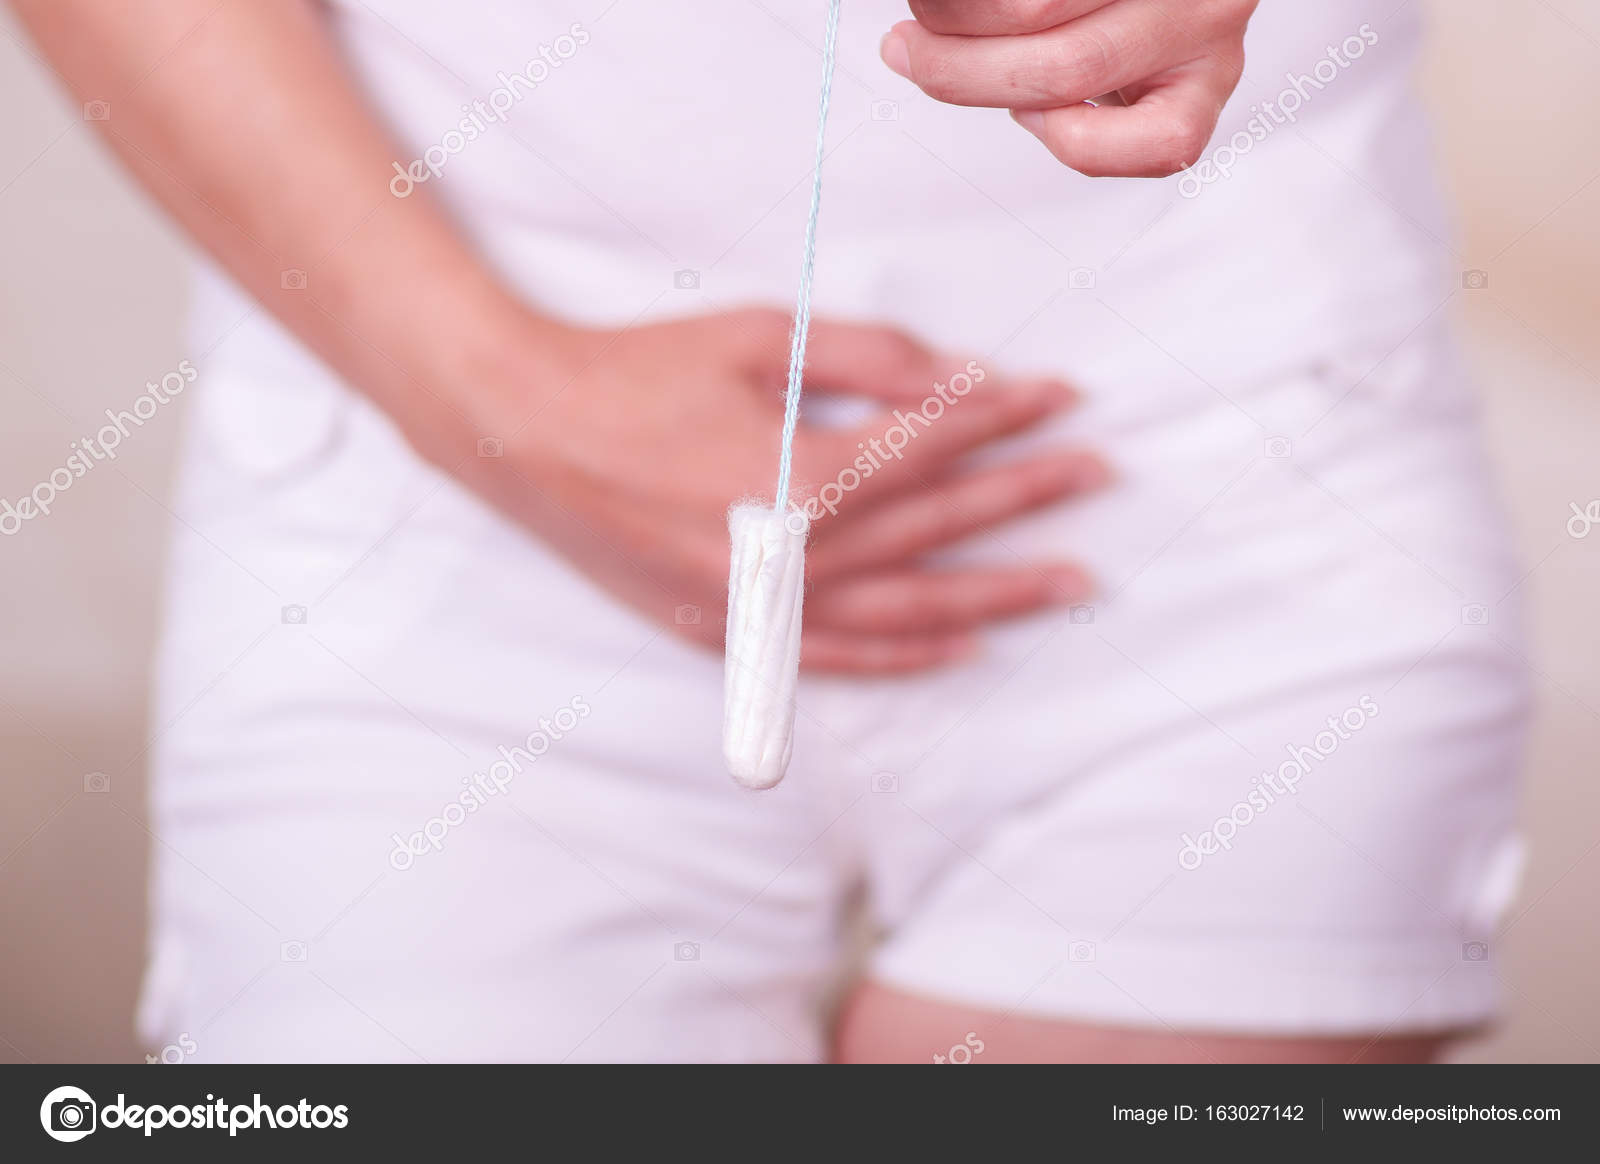 Young woman holding a menstruation cotton tampon with her hand and